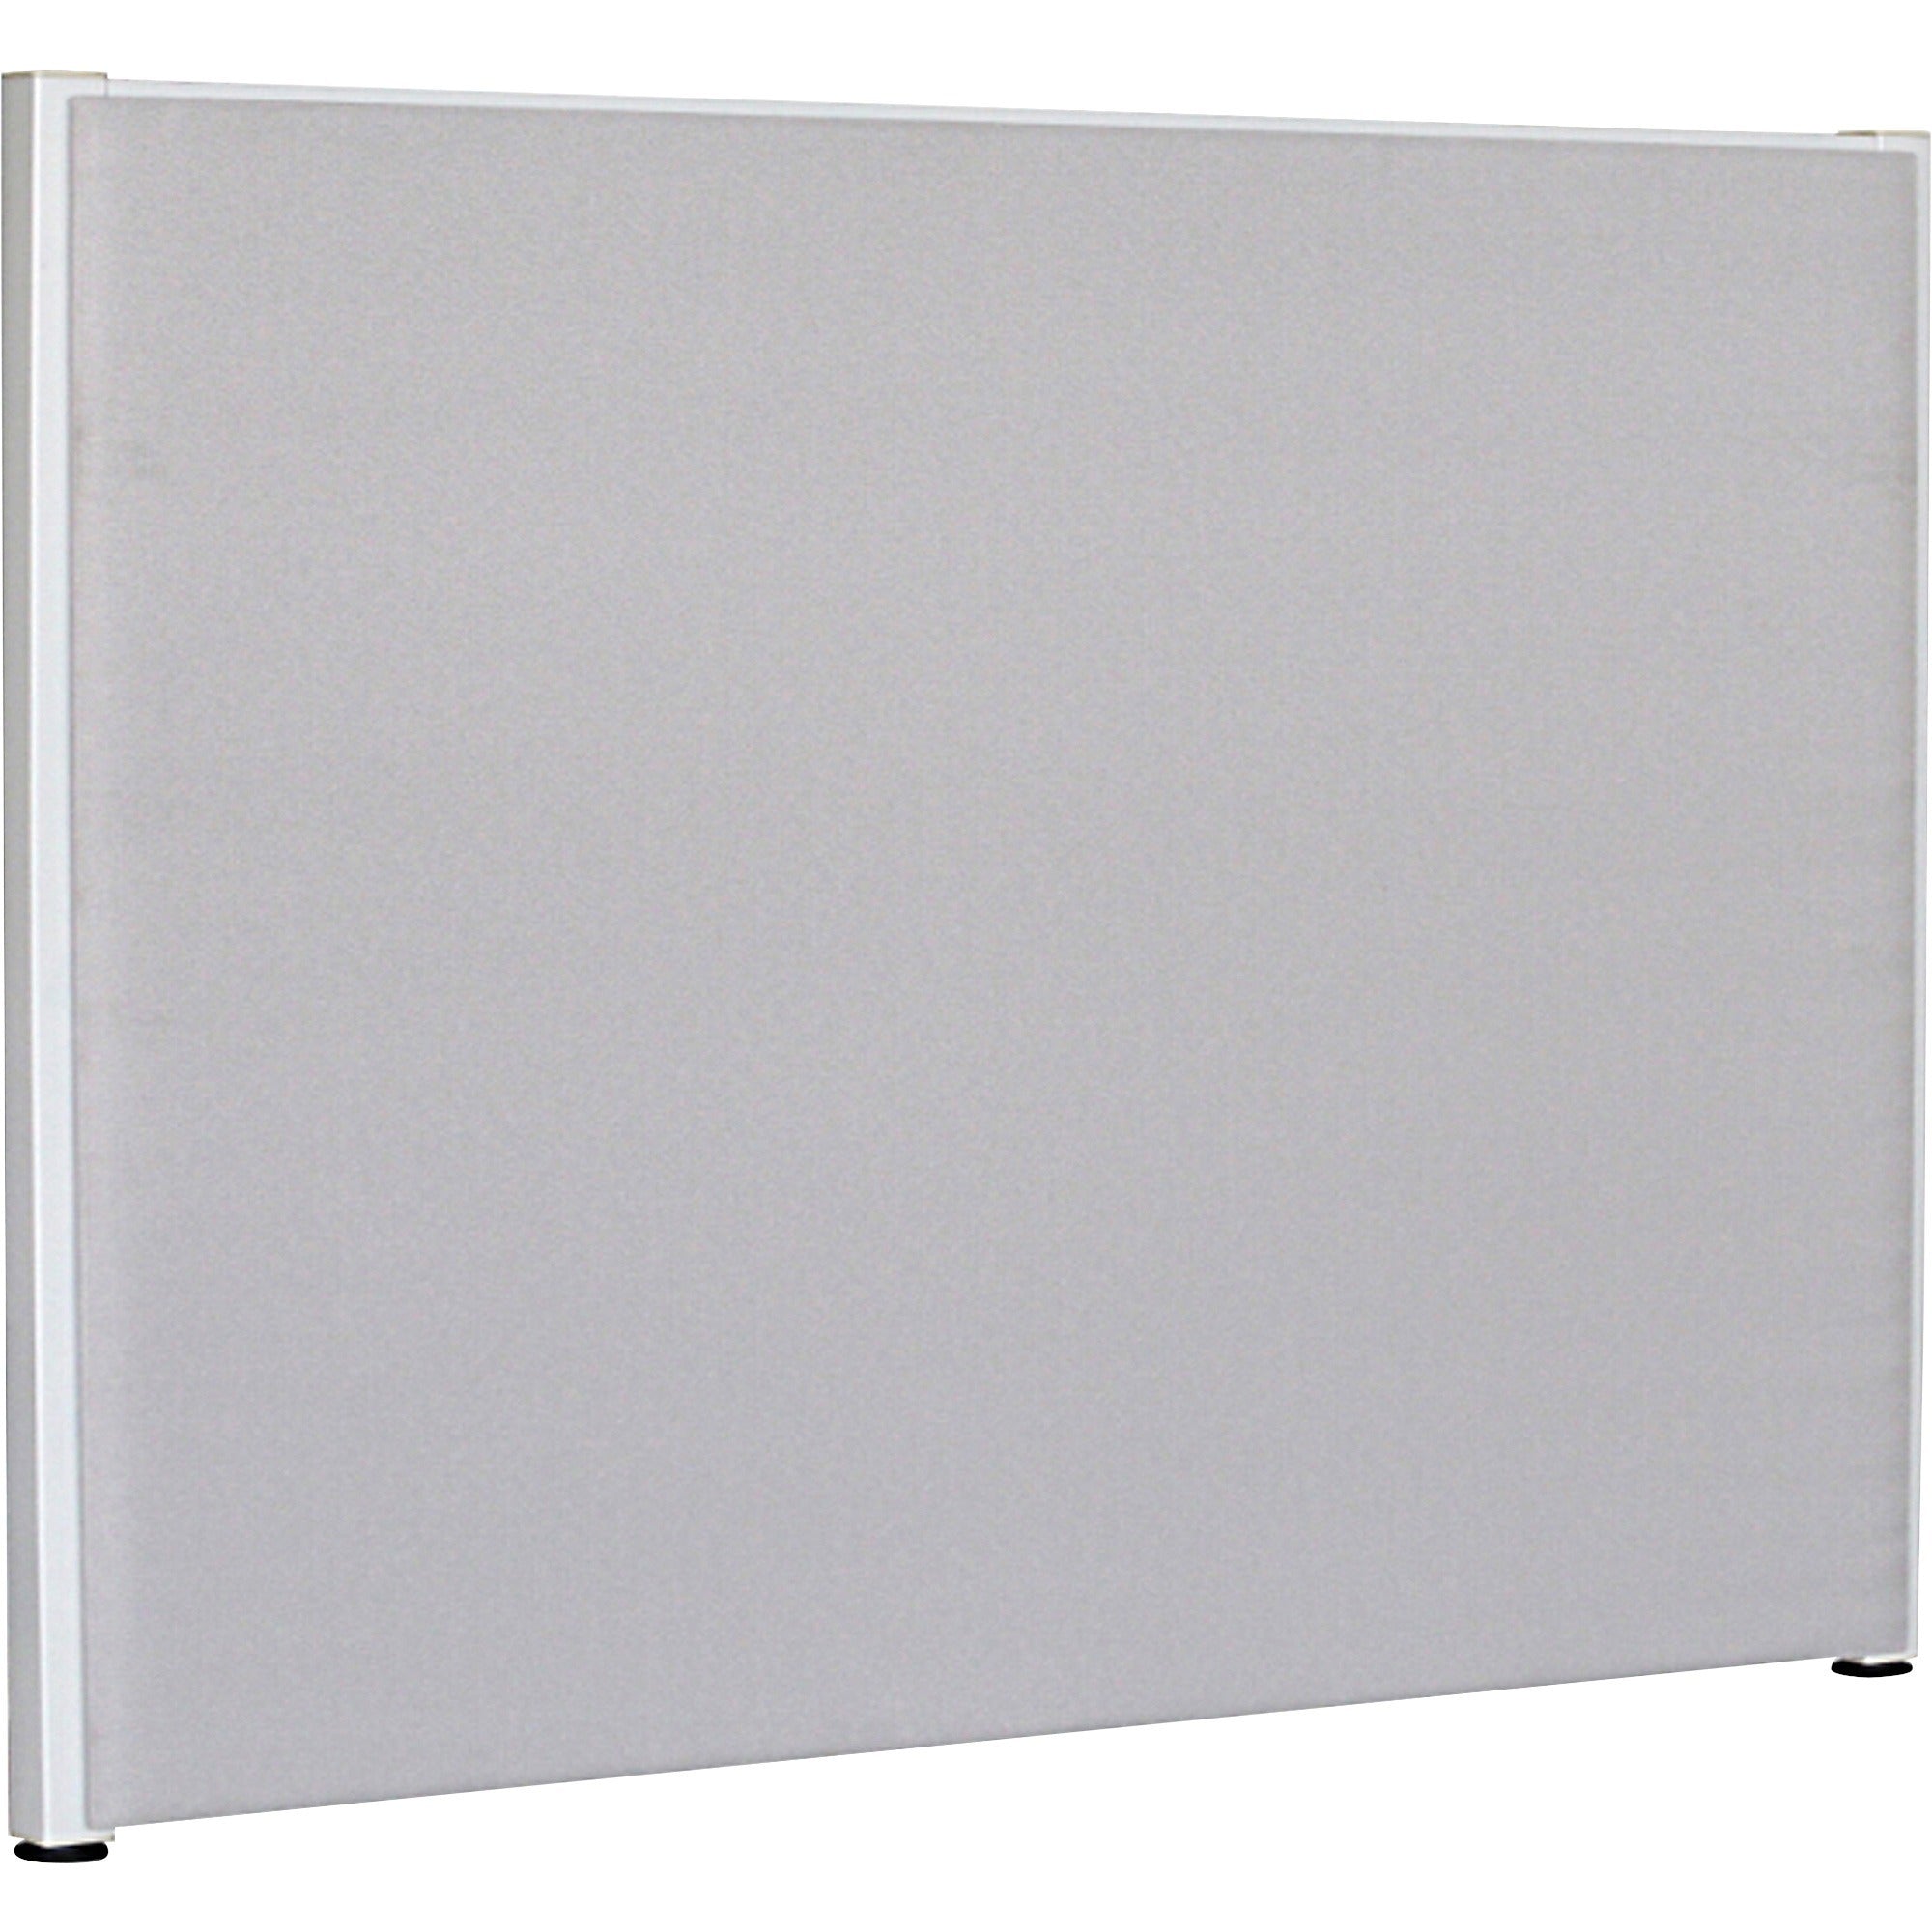 lorell-panel-system-partition-fabric-panel-72-width-x-48-height-fabric-steel-gray-1-each_llr90264 - 1